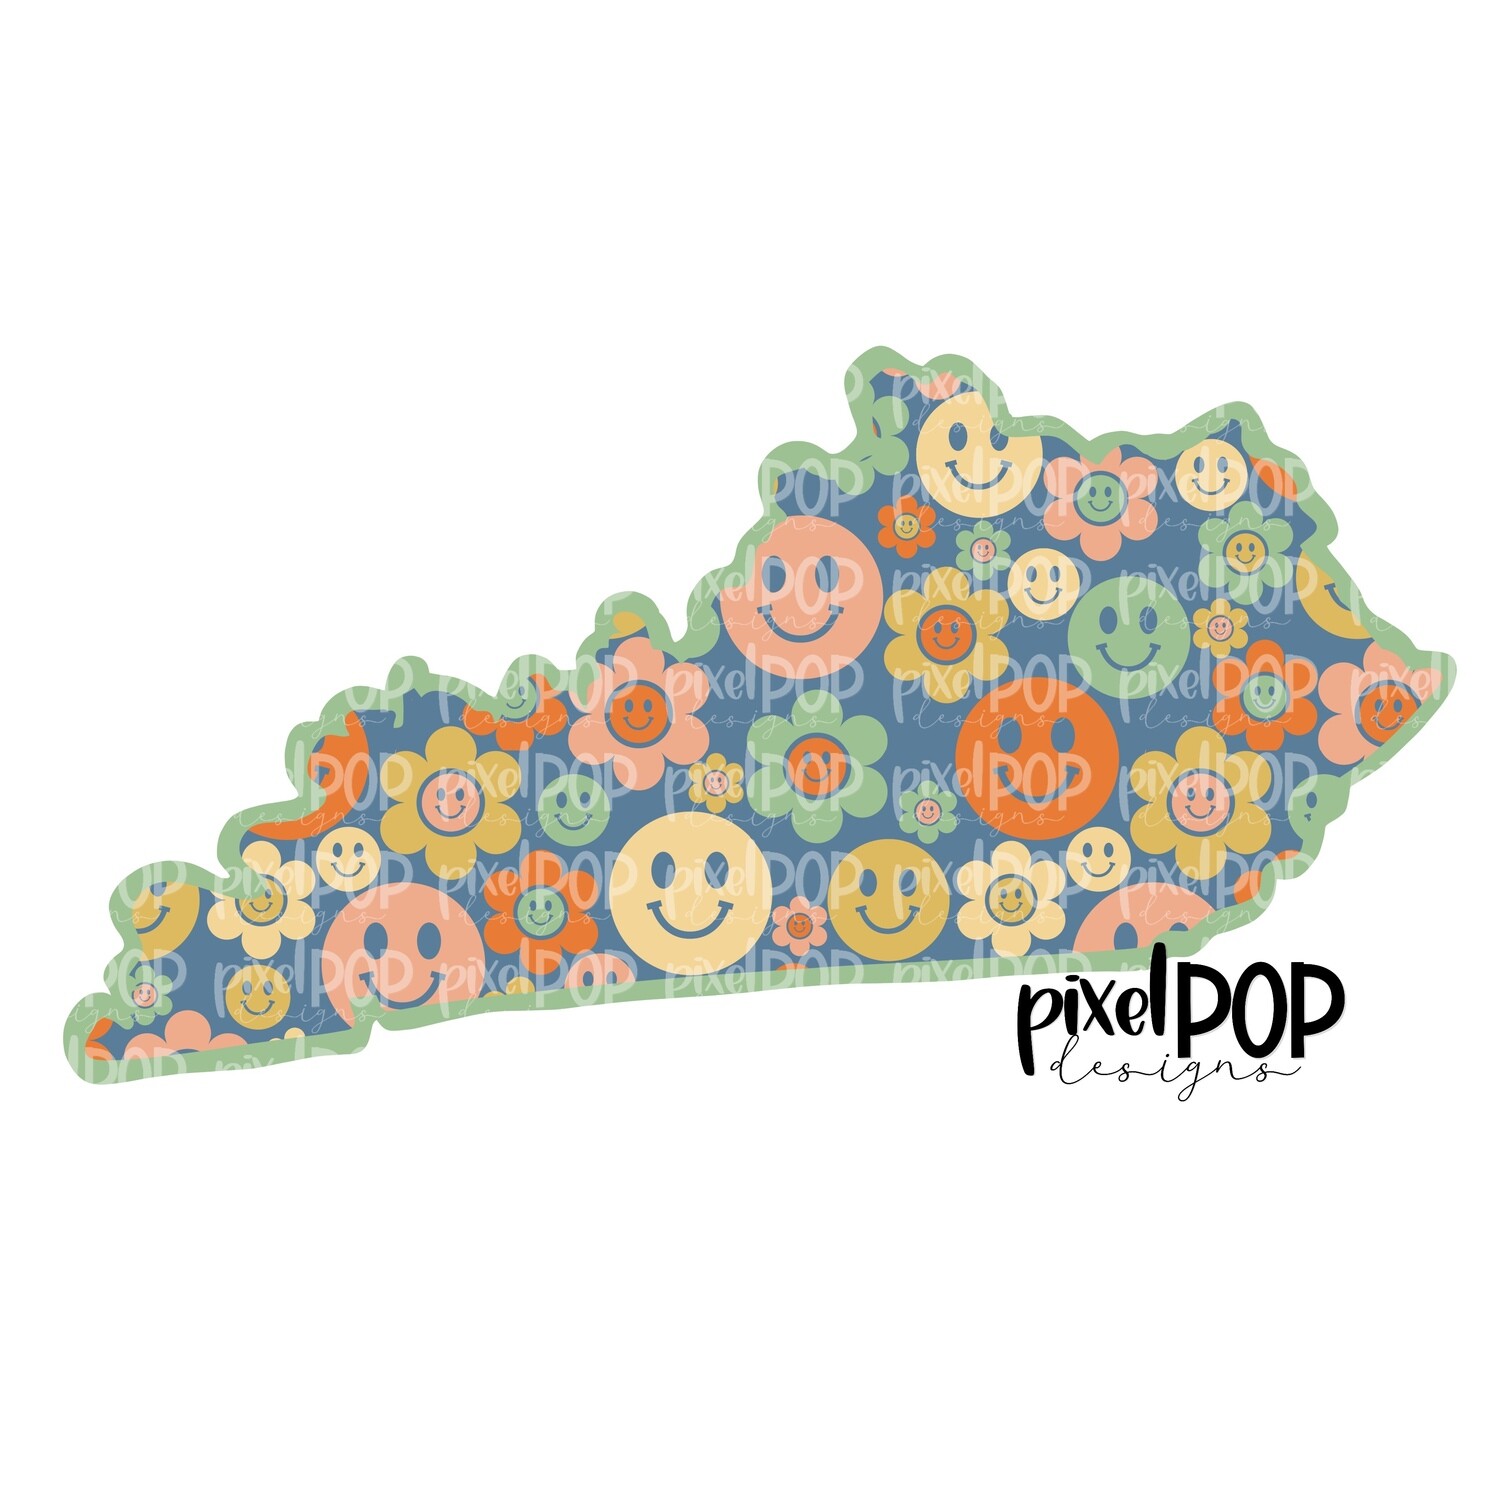 State of Kentucky Shape Retro Smileys Digital PNG | Texas TX | Home State | Heat Transfer | Digital | Floral State Shape